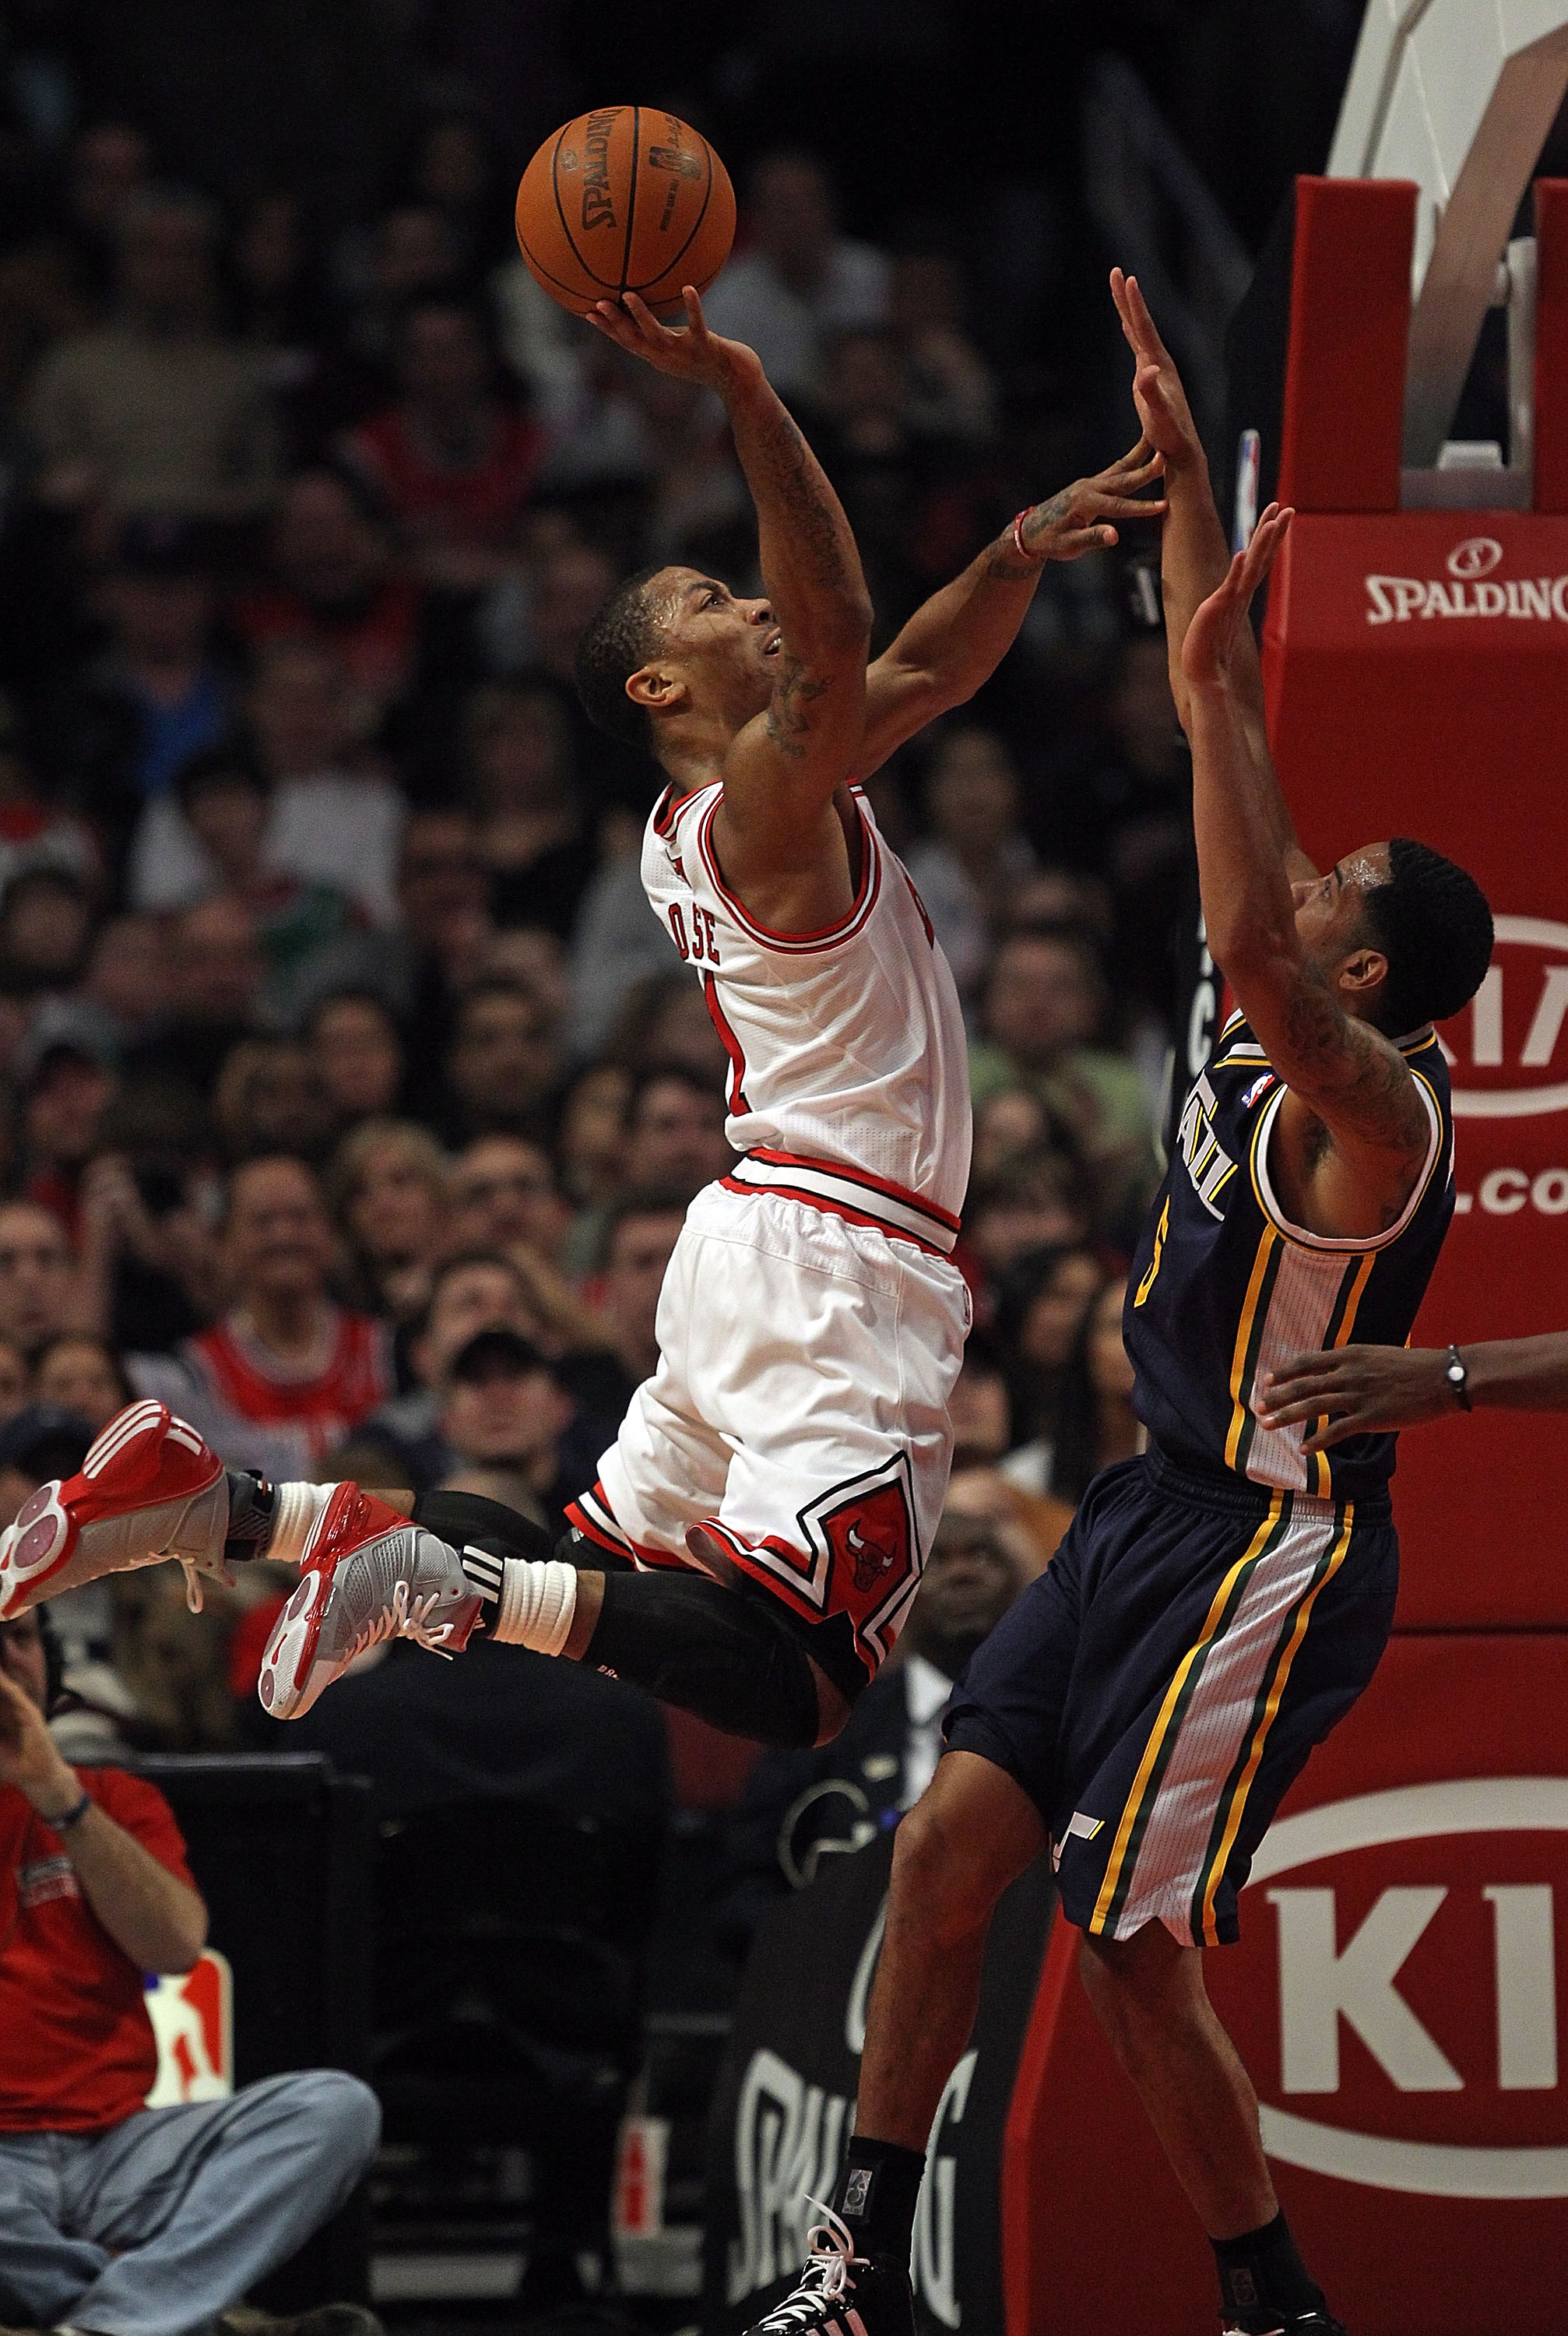 Derrick Rose of the Chicago Bulls takes a pass and leaps to dunk the  News Photo - Getty Images